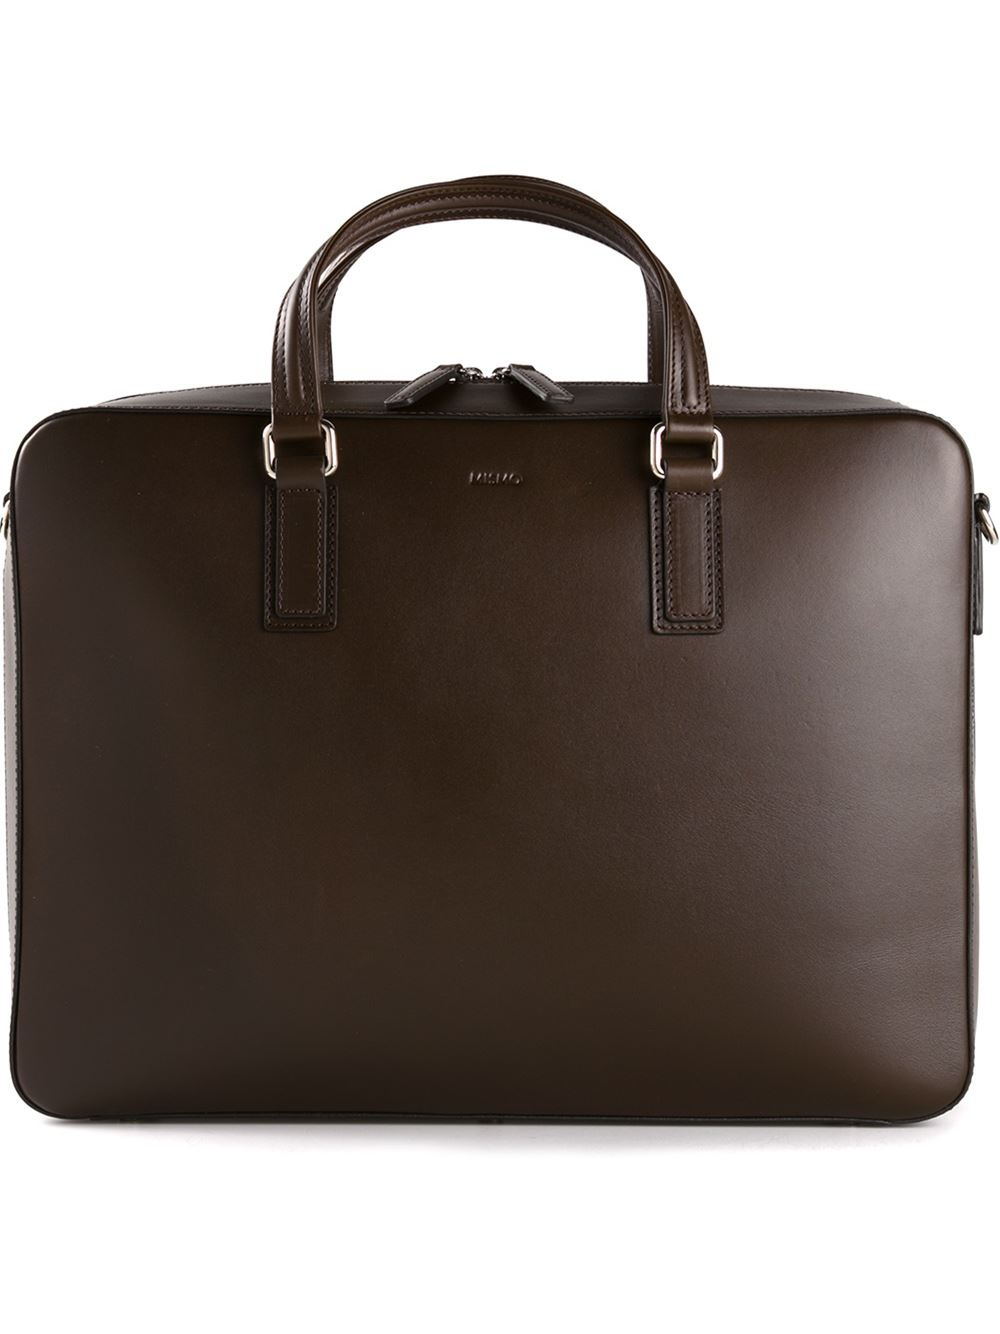 Mismo Morris Briefcase in Brown for Men - Lyst